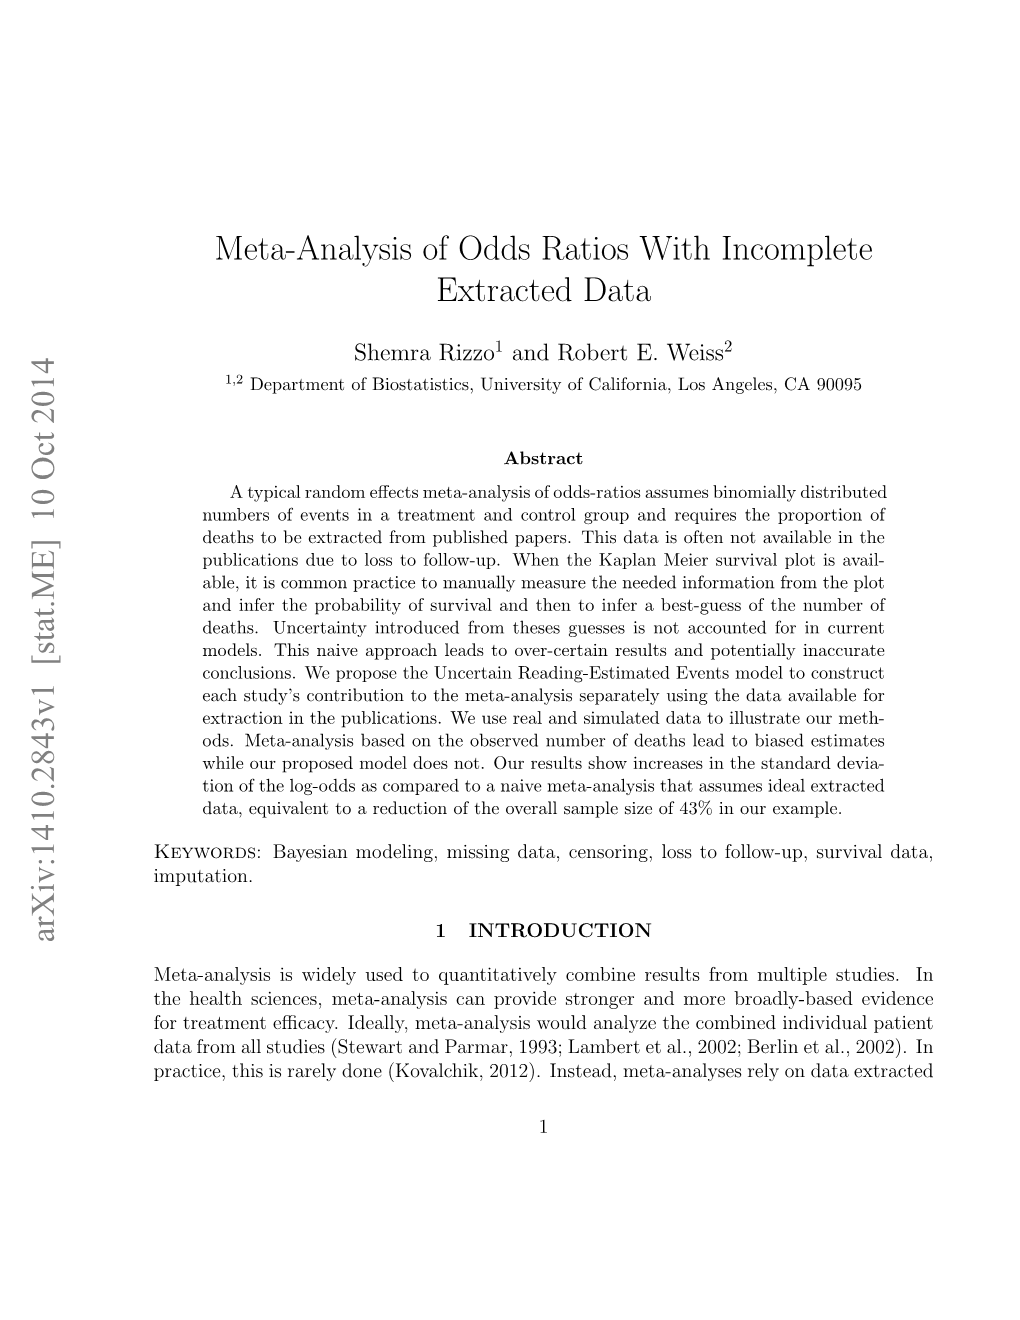 Meta-Analysis of Odds Ratios with Incomplete Extracted Data